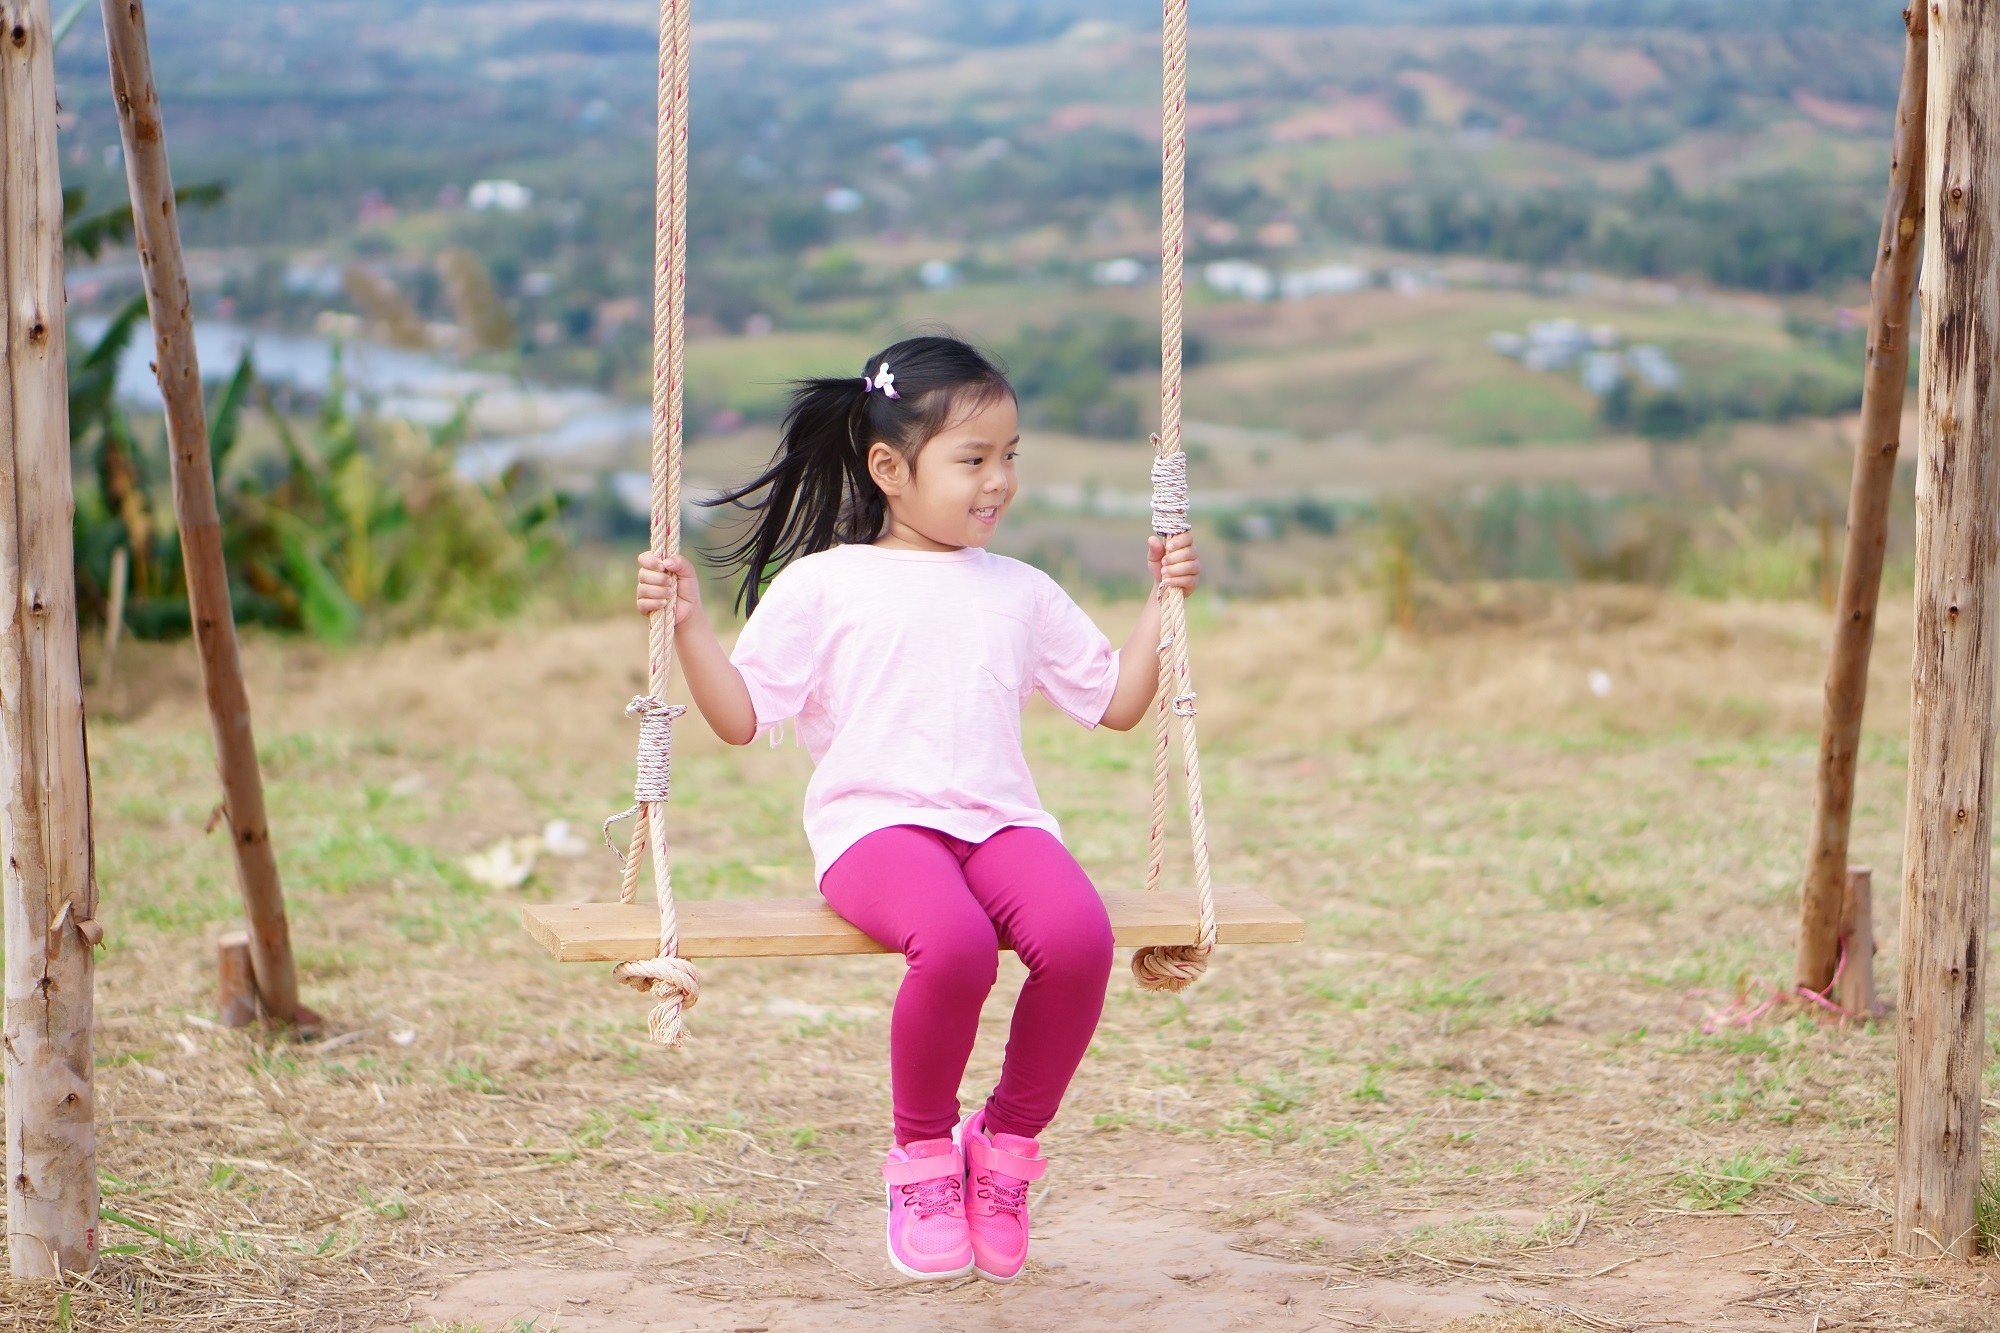 Thai adorable little girl on wooden swing smiling brightly